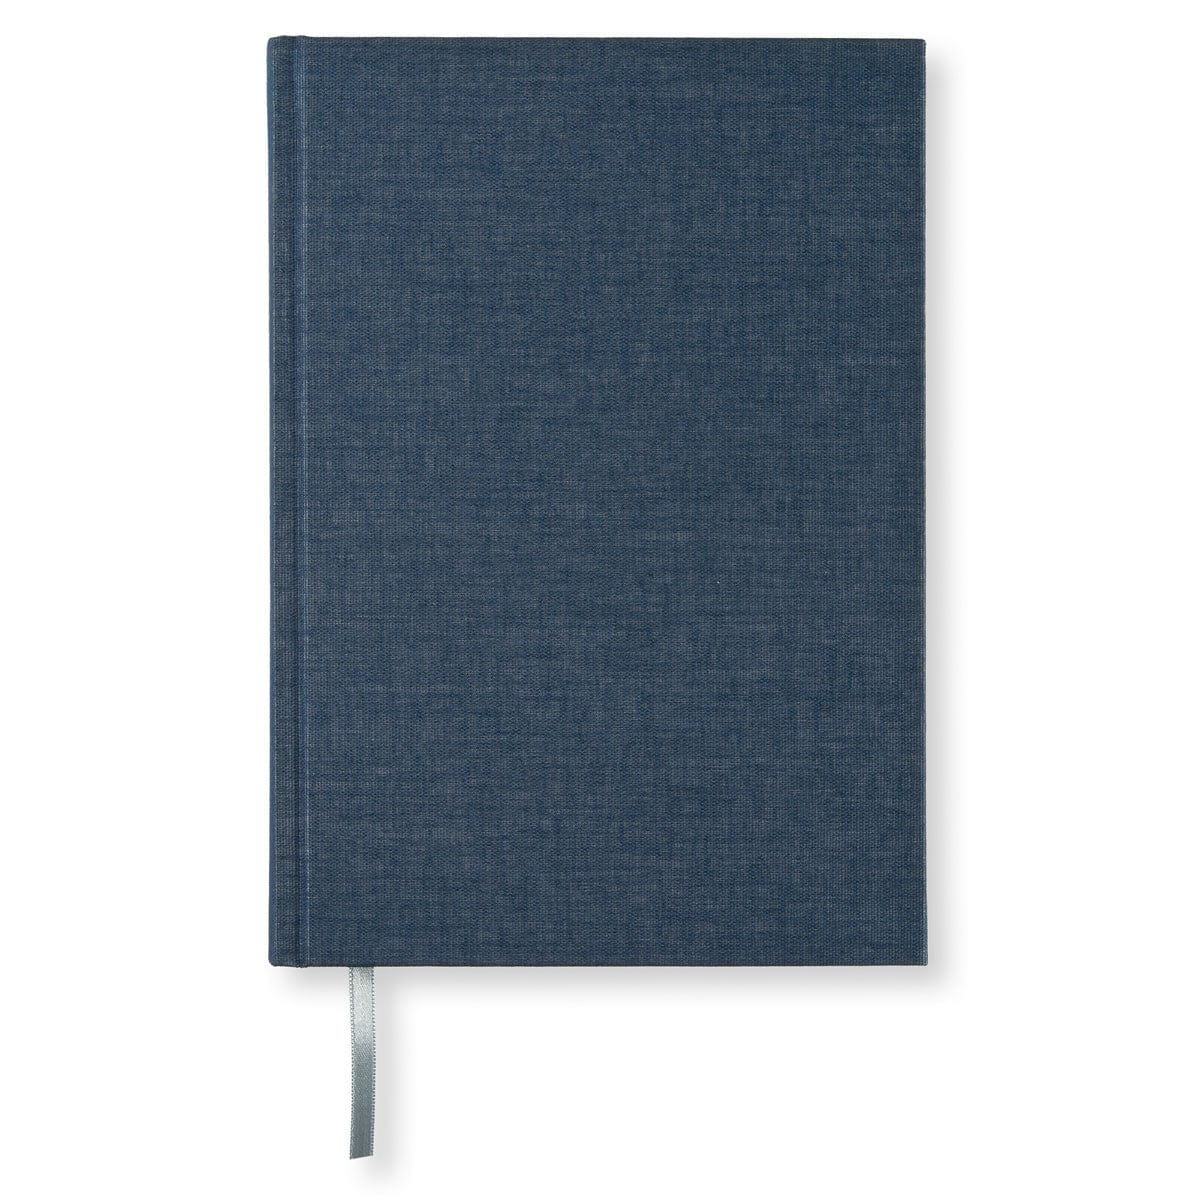 PaperStyle Paperstyle NOTEBOOK A5 128p. Ruled Dark Denim